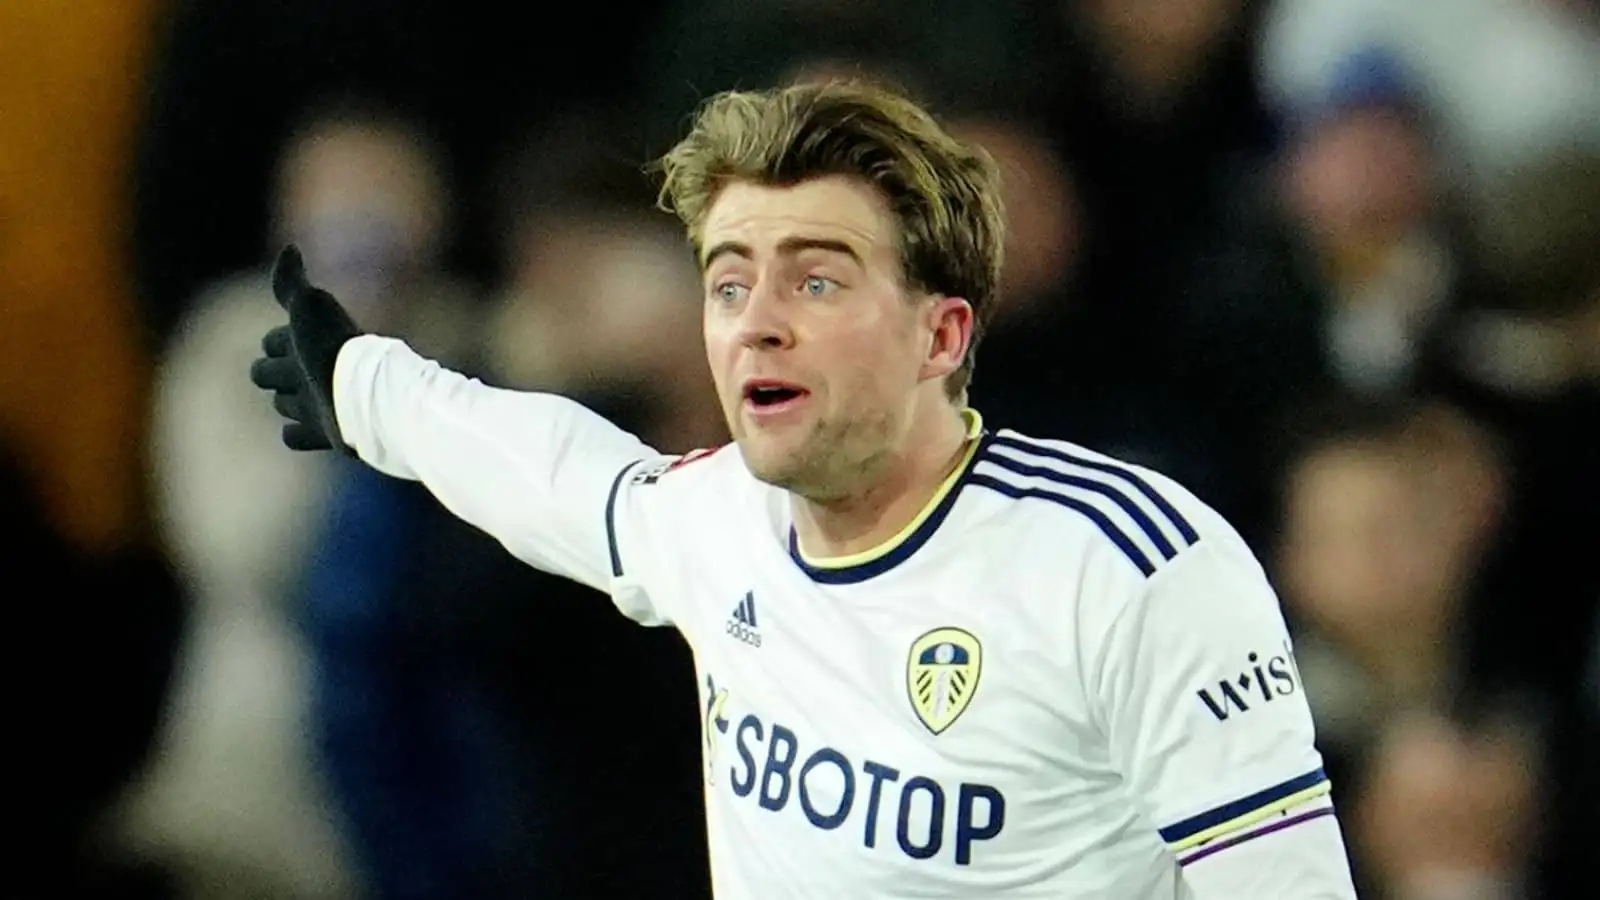 ‘He’s a joke’ – Leeds Utd star condemned amid claim startling comments contributed to Jesse Marsch sack